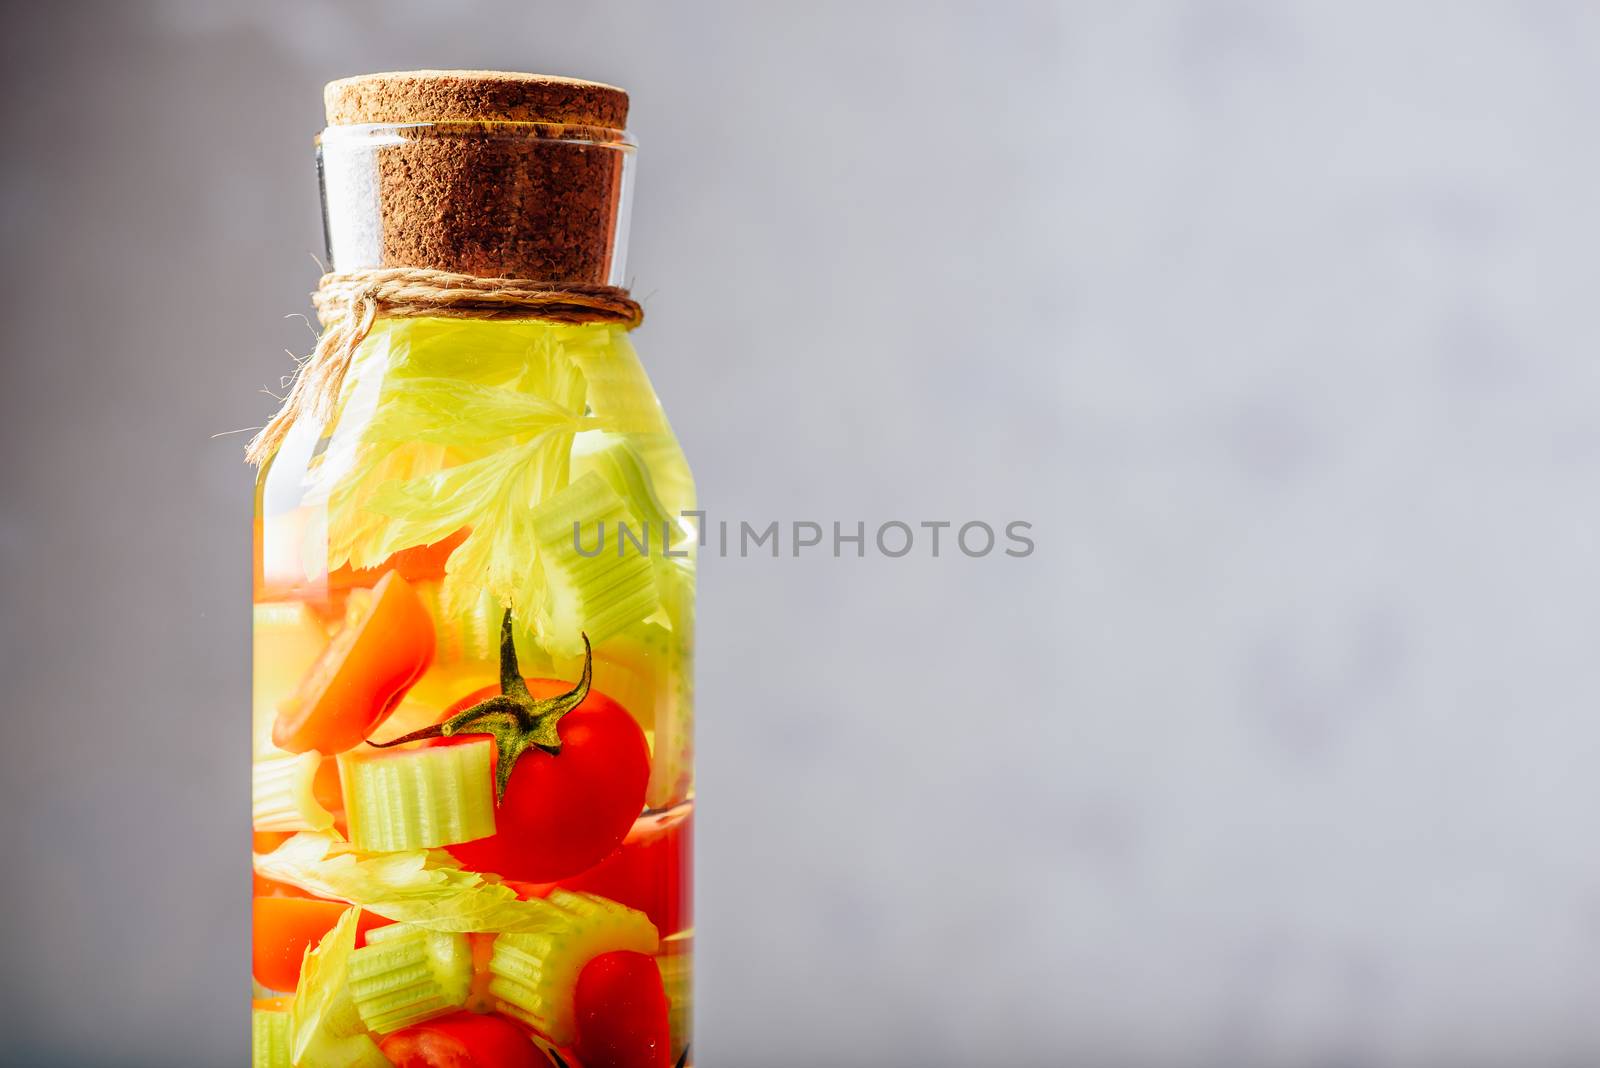 Part of Bottle with Water Infused with Cherry Tomato and Celery Stems. Copy Space on the Right.